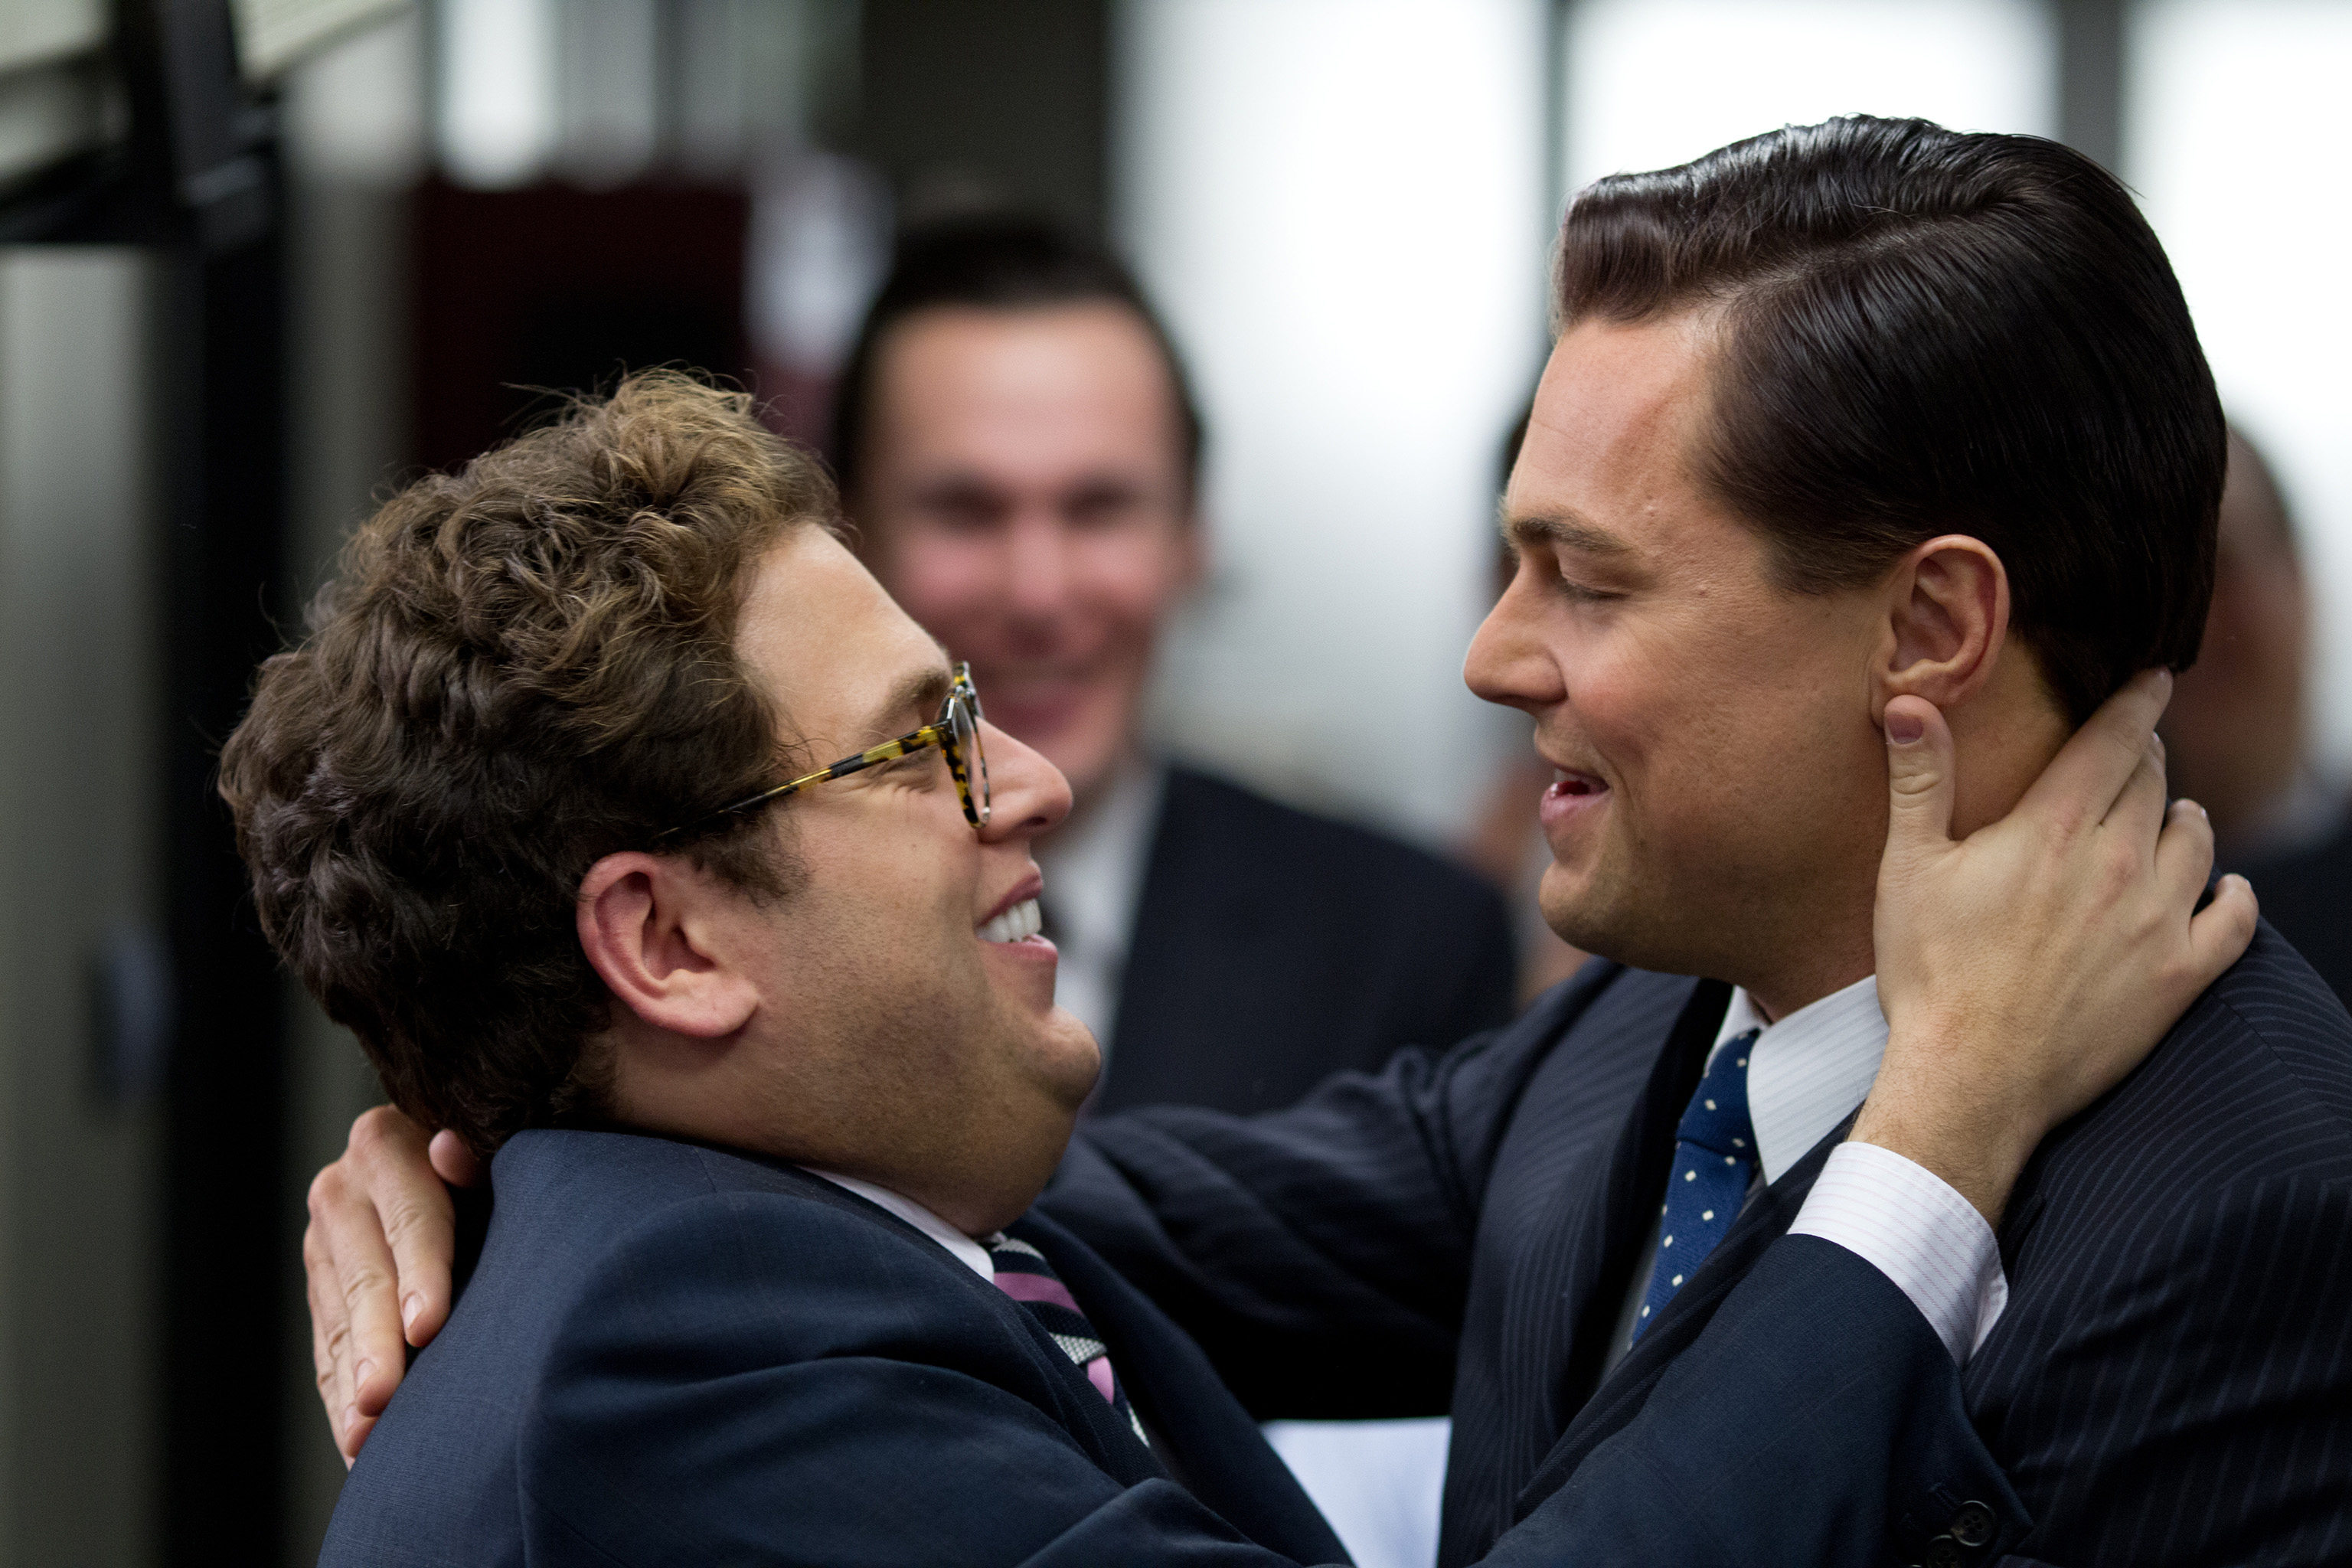 Movie Review: The Wolf of Wall Street Is In Top Form